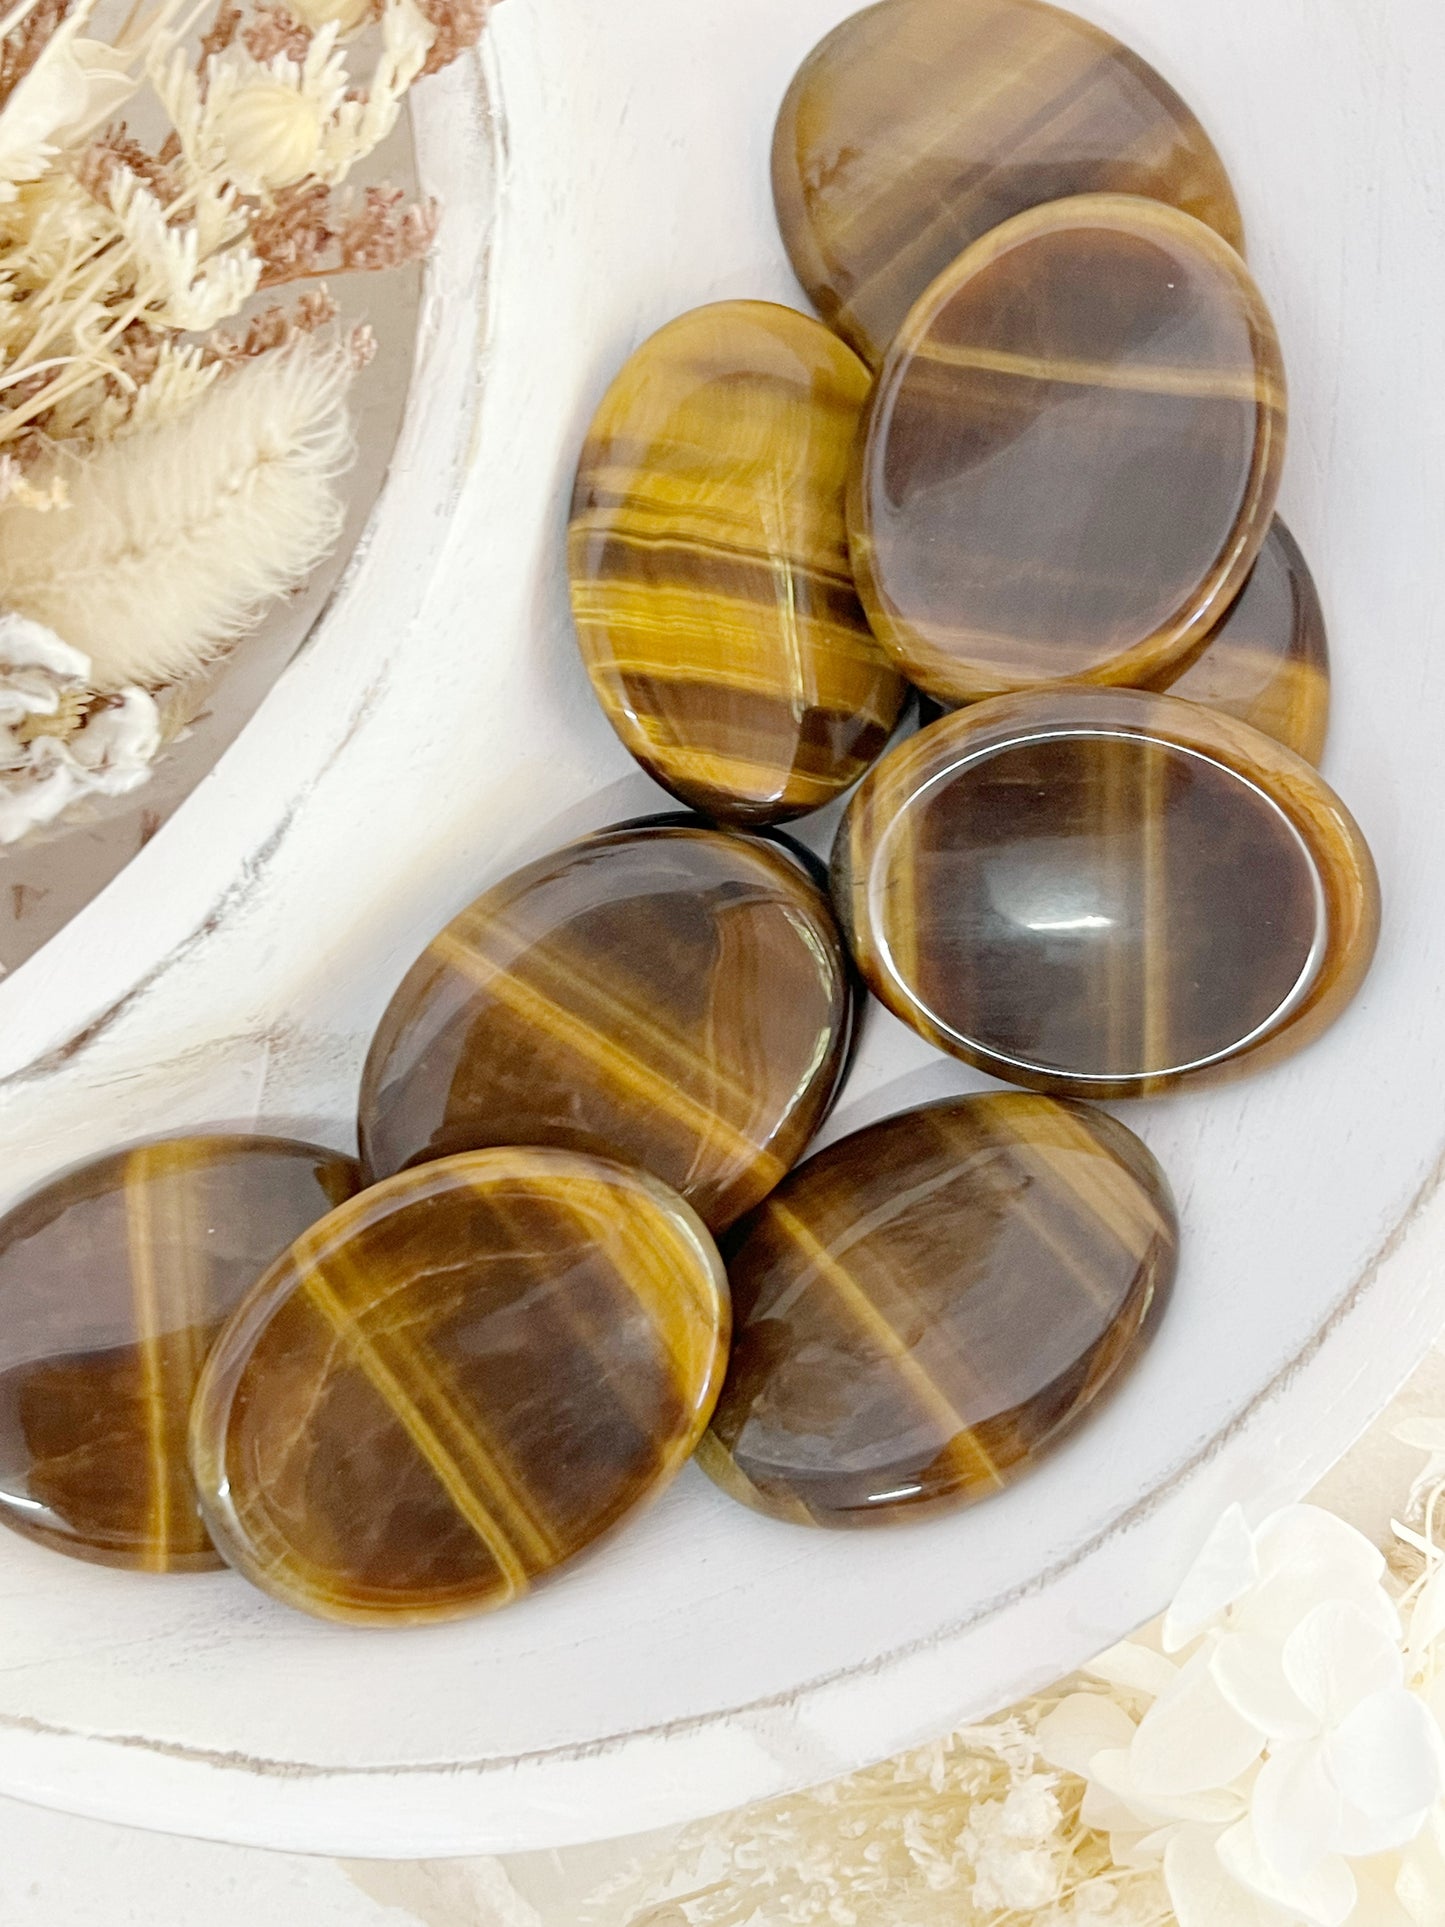 TIGERS EYE WORRY STONE || INTUITIVELY CHOSEN